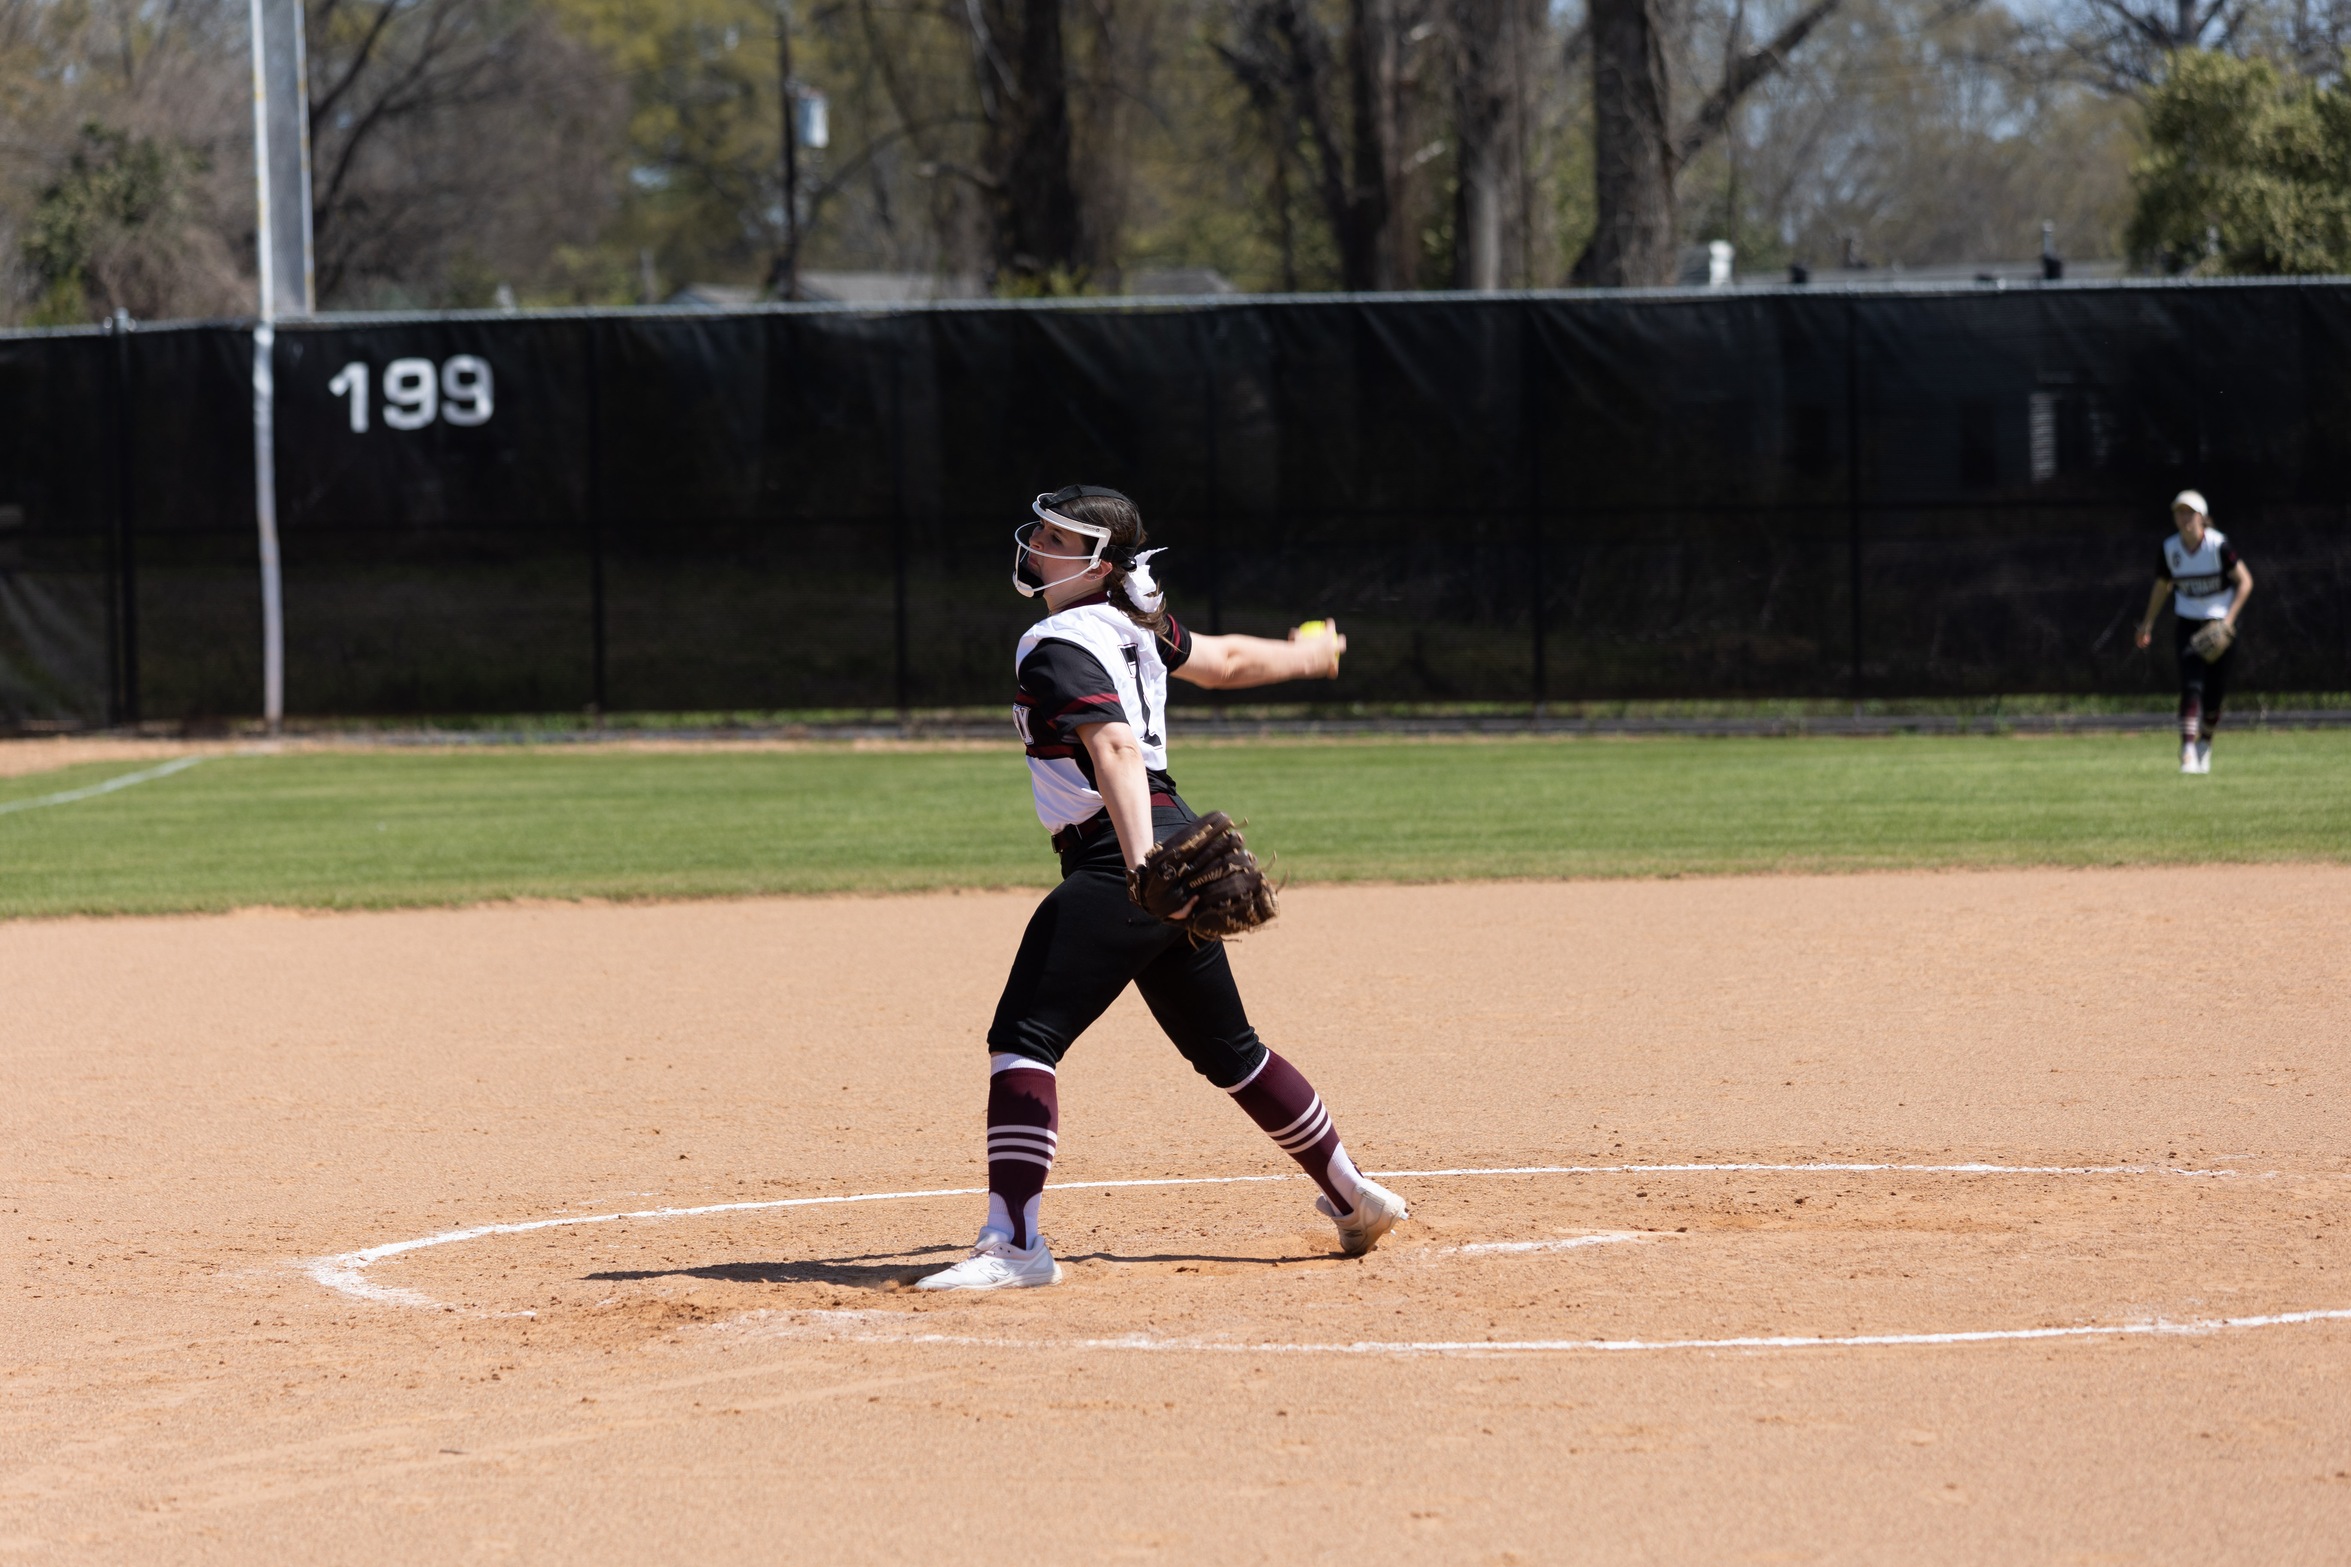 Freshman Anna Scarbock went nine innings on Saturday to help the Ladies earn a DH split with Southwestern.